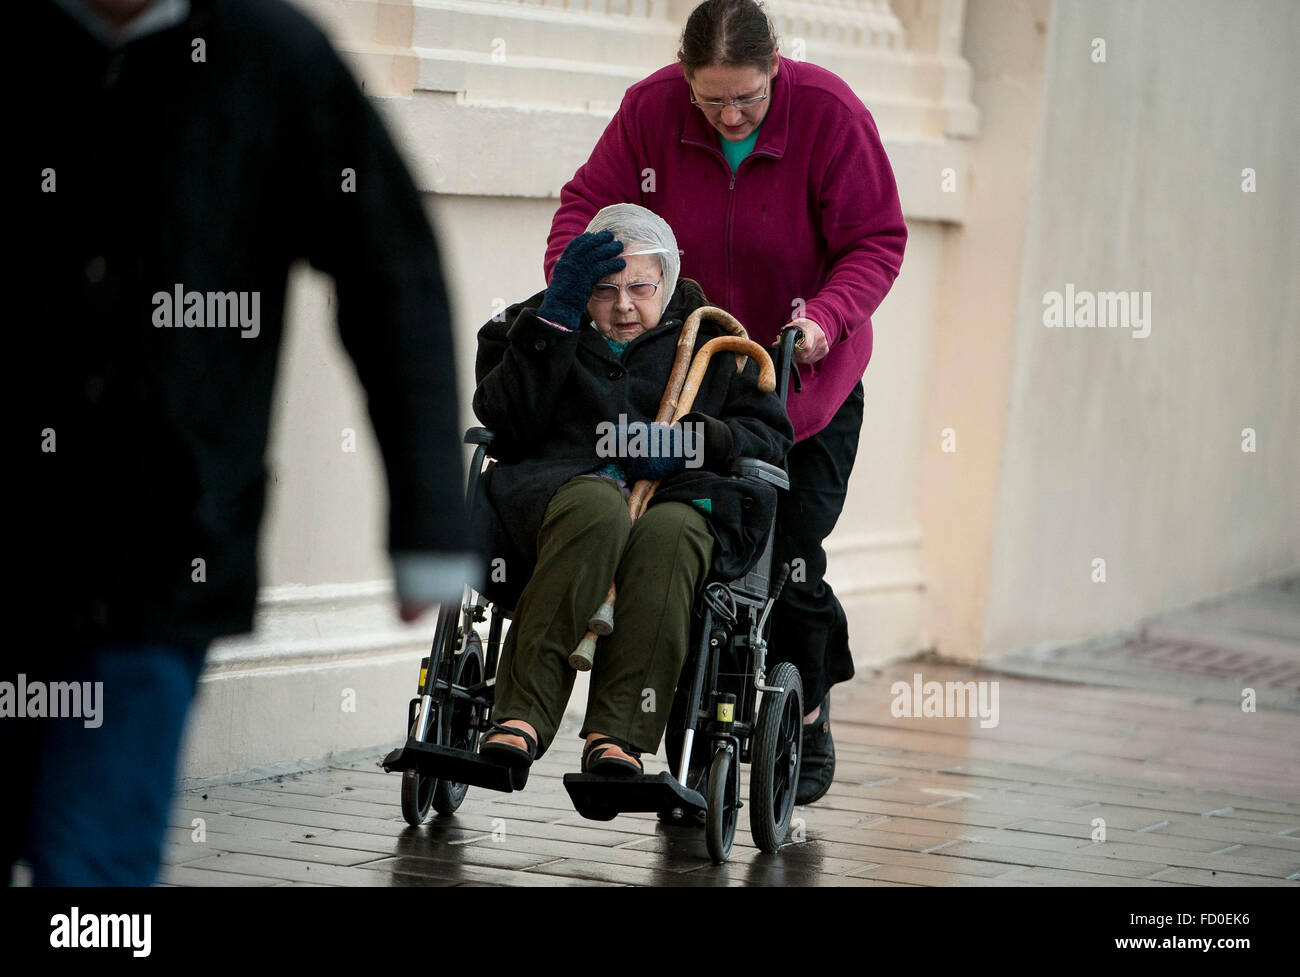 Brighton, Sussex, UK. 26th January, 2016. UK Weather: The storm which has caused snow chaos in America arrives in the UK today bringing heavy rain and high winds. Scenes of people battling the elements in Brighton, Sussex, UK. Picture taken 26/01/2016   Credit:  Darren Cool/Alamy Live News Stock Photo